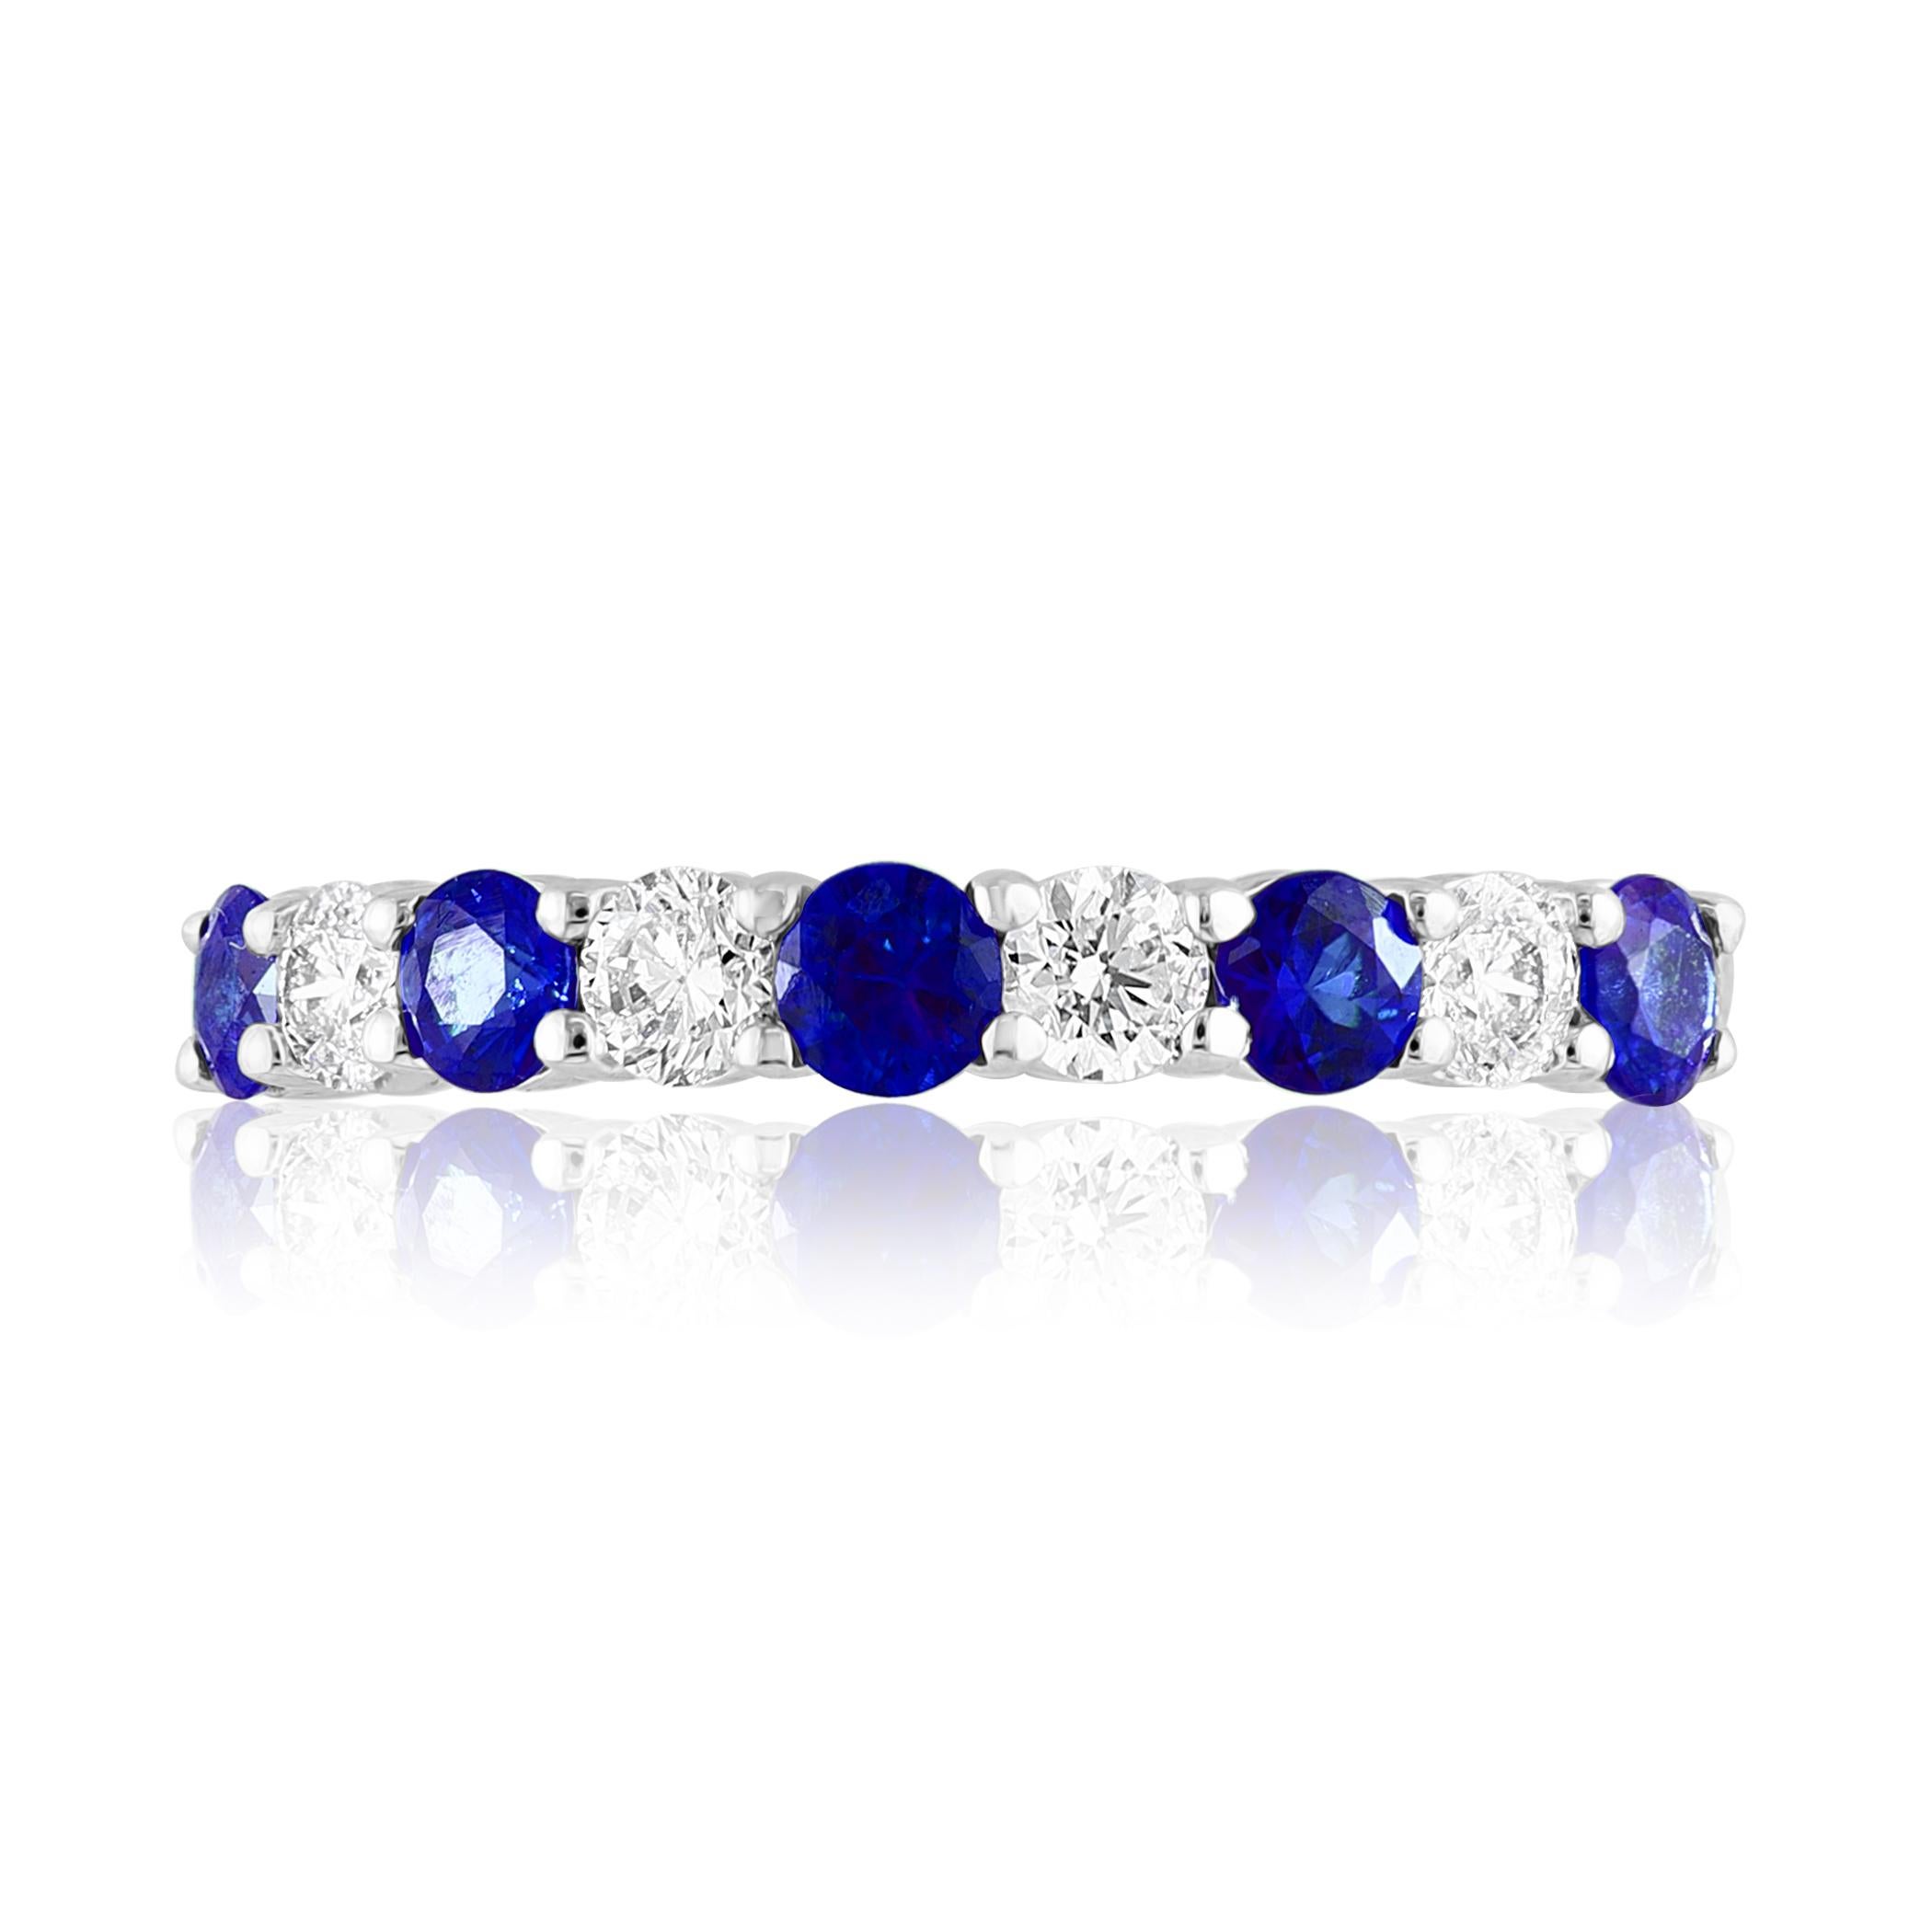 A fashionable and classic wedding band showcasing 4 brilliant cut diamonds weighing 0.37 carats total alternating with 5 round blue sapphires weighing 0.49 carats. Stones secured with a shared 4 prong setting made with 14K white gold. A versatile